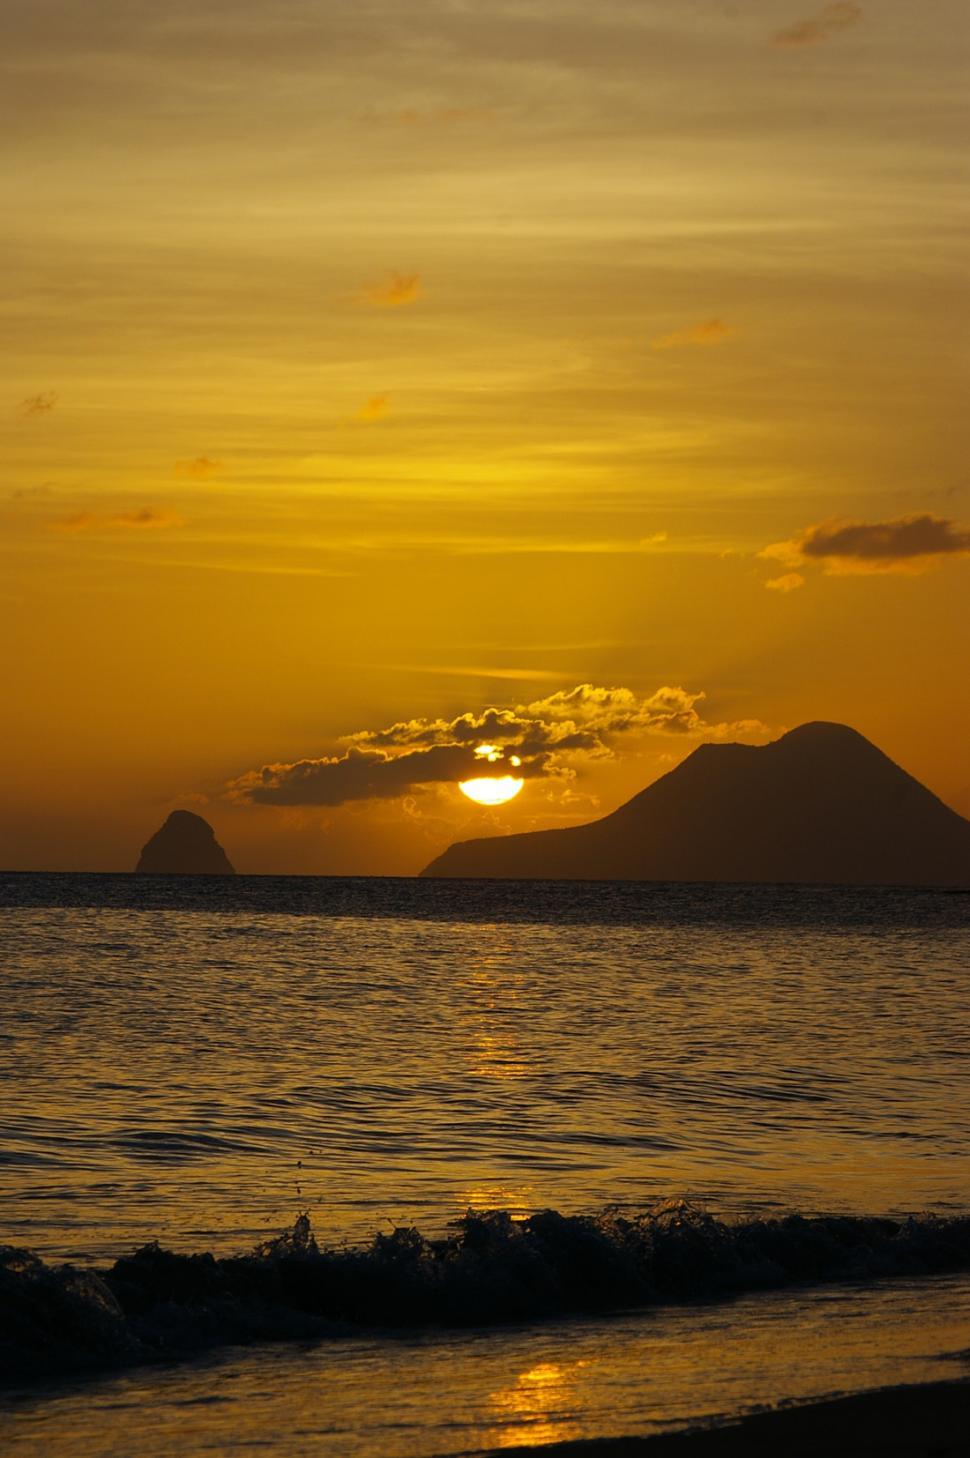 Free Image of Sun Setting Over Ocean With Mountains in Distance 